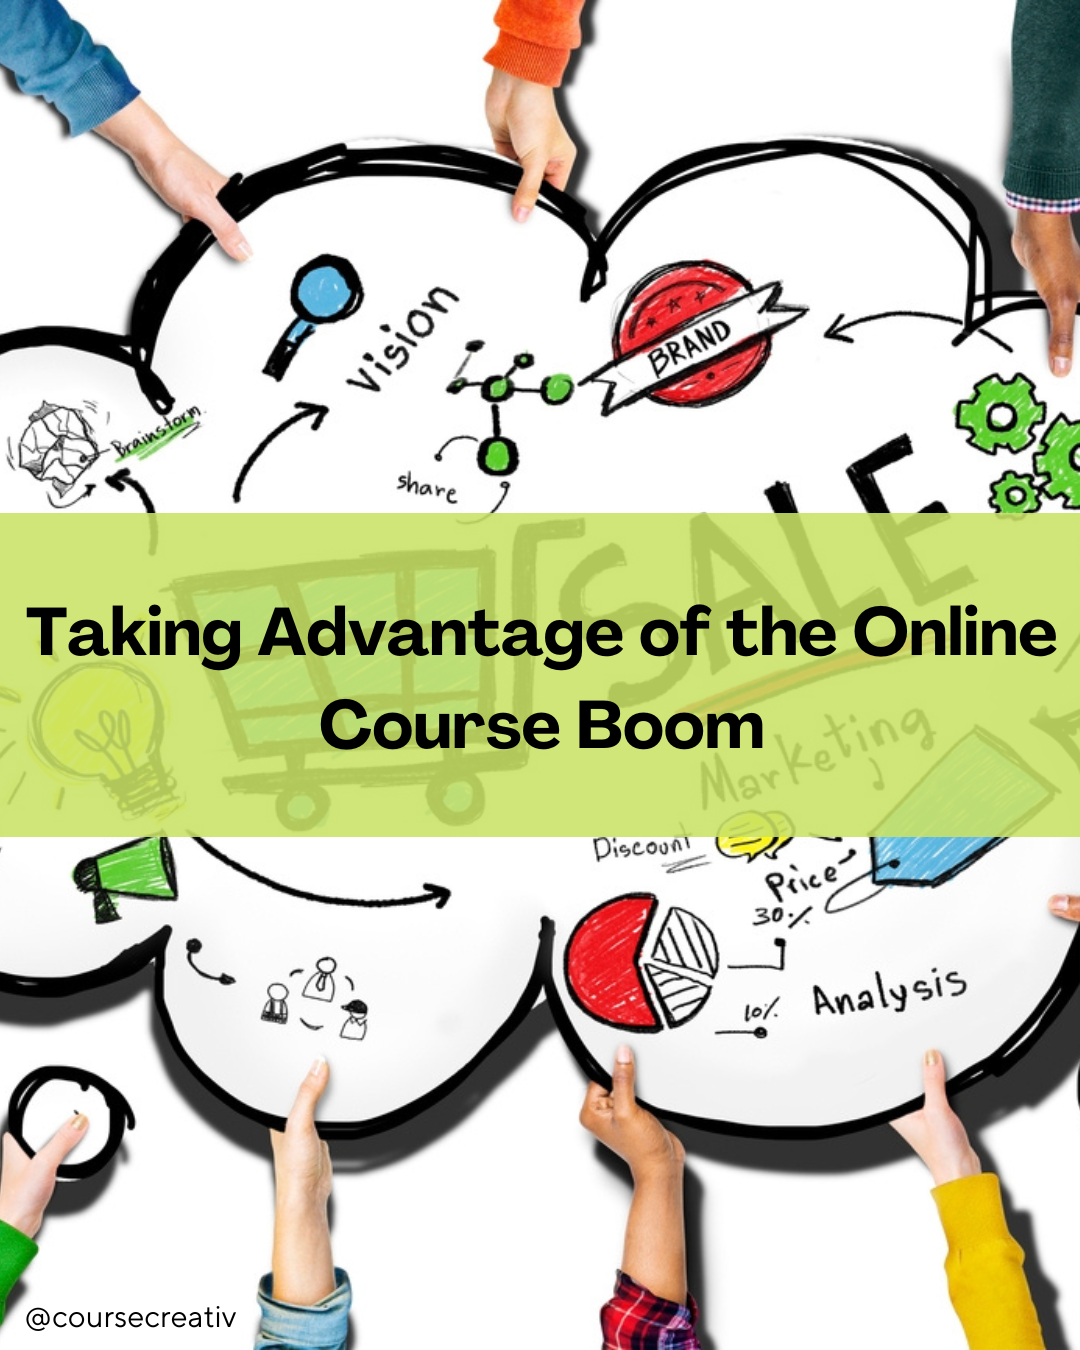 Taking Advantage of the Online Course Boom - Course Creation With Course Creativ